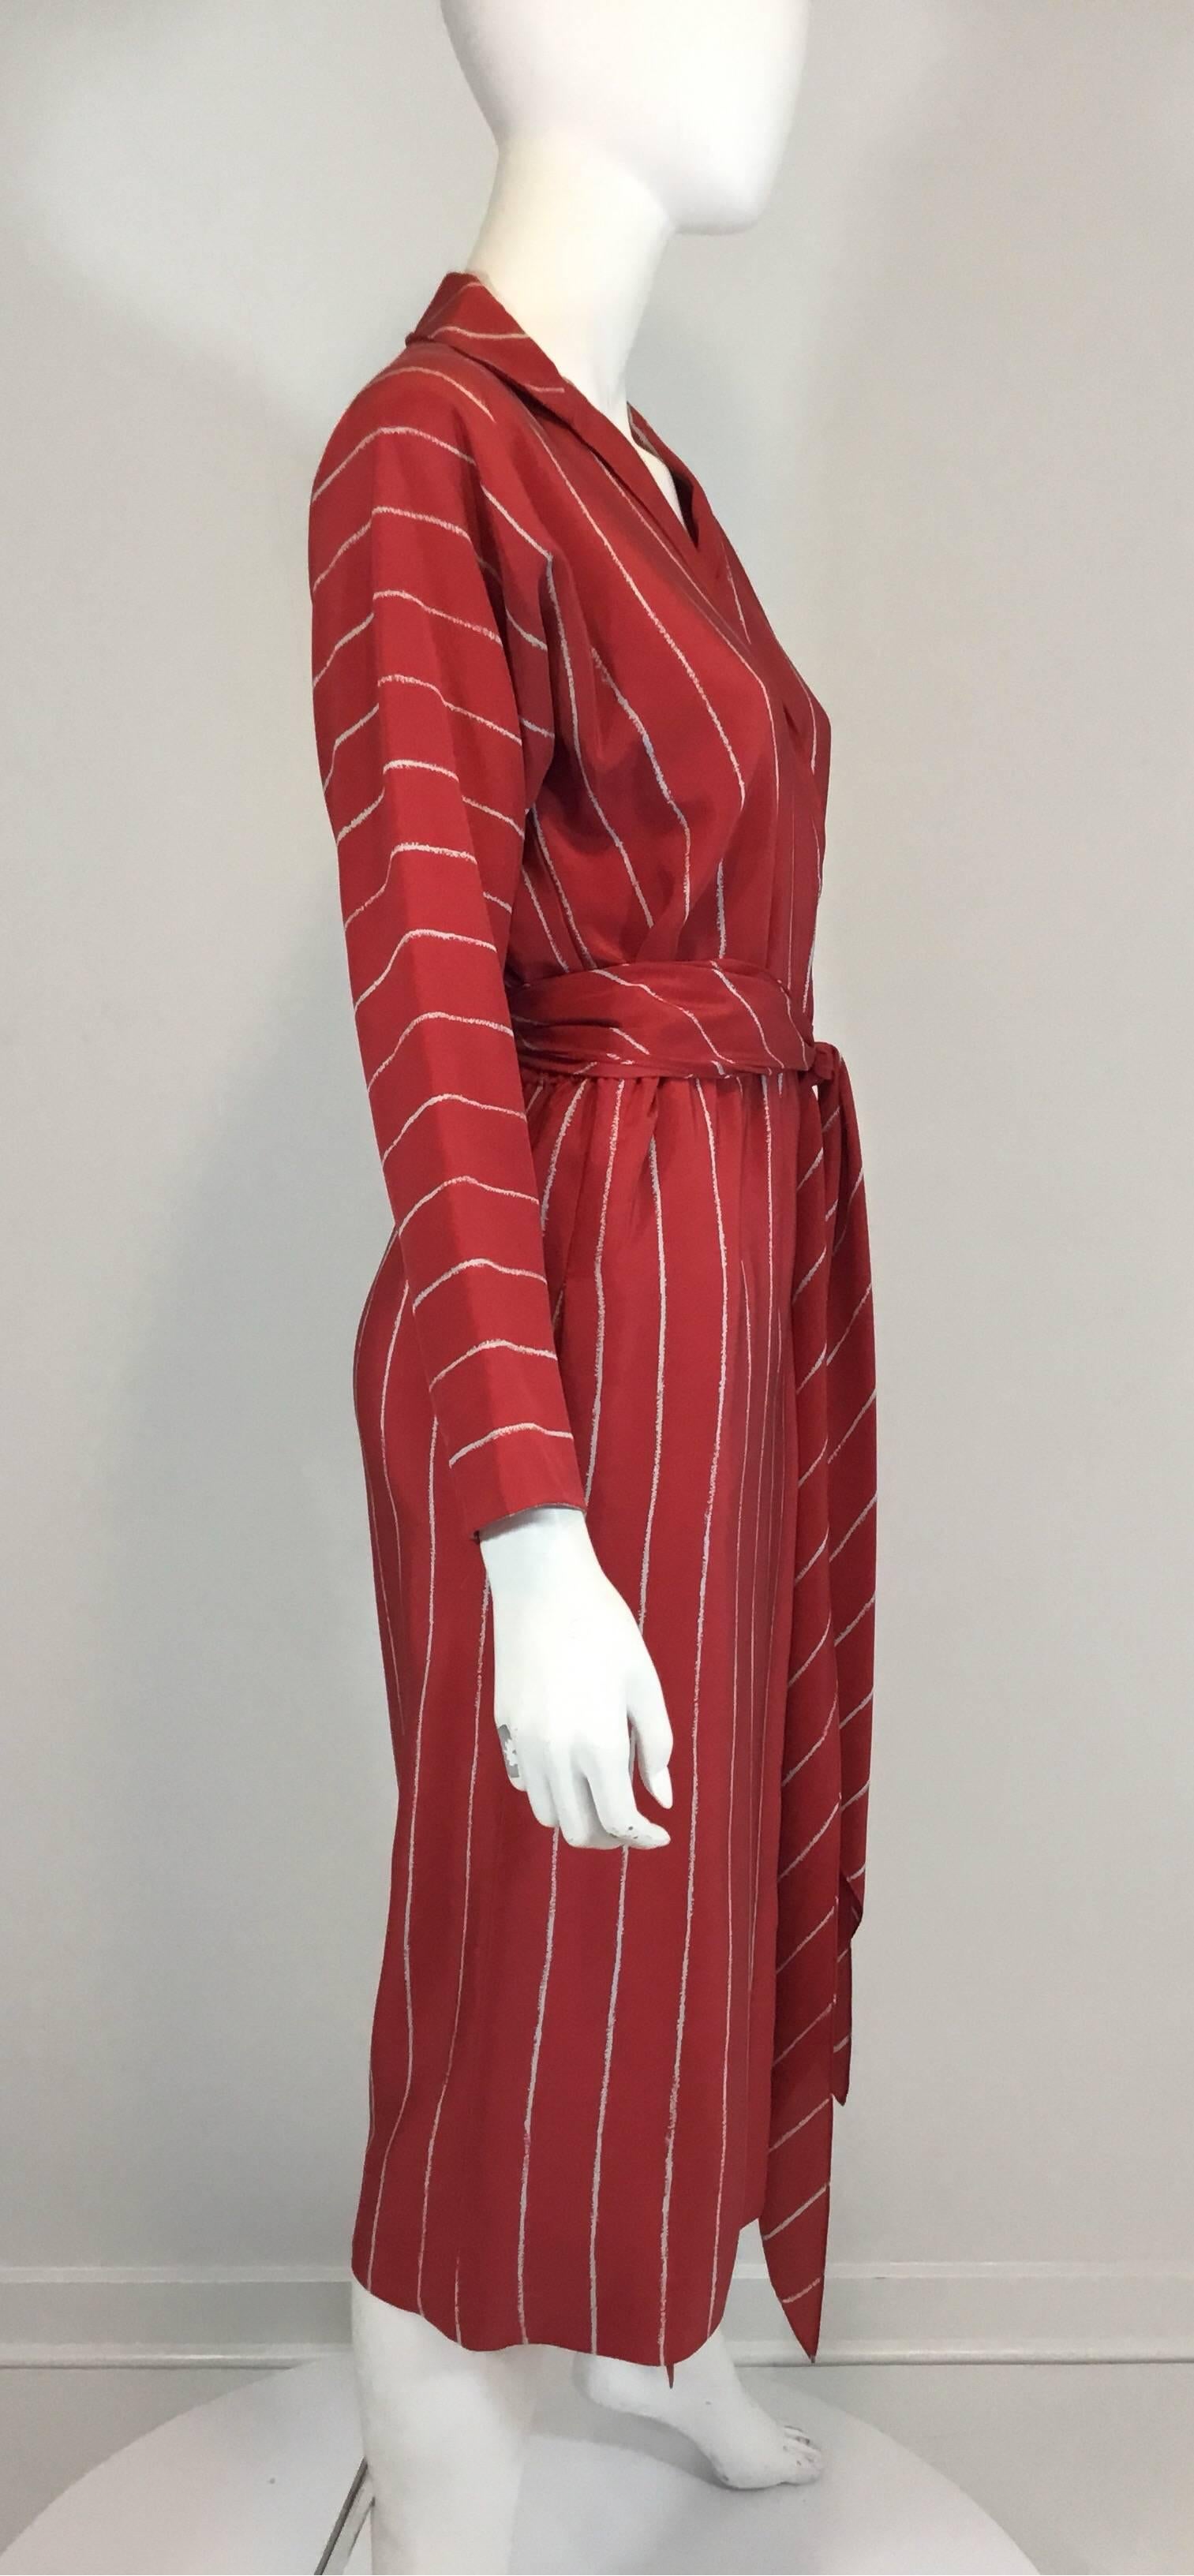 Vintage Halston silk wrap dress in a red and white stripe pattern throughout, hook and eye and snap button fastening at the waist and an optional waist belt/sash. Dress fullly lined and has slip pockets at the waist. Excellent condition.

bust